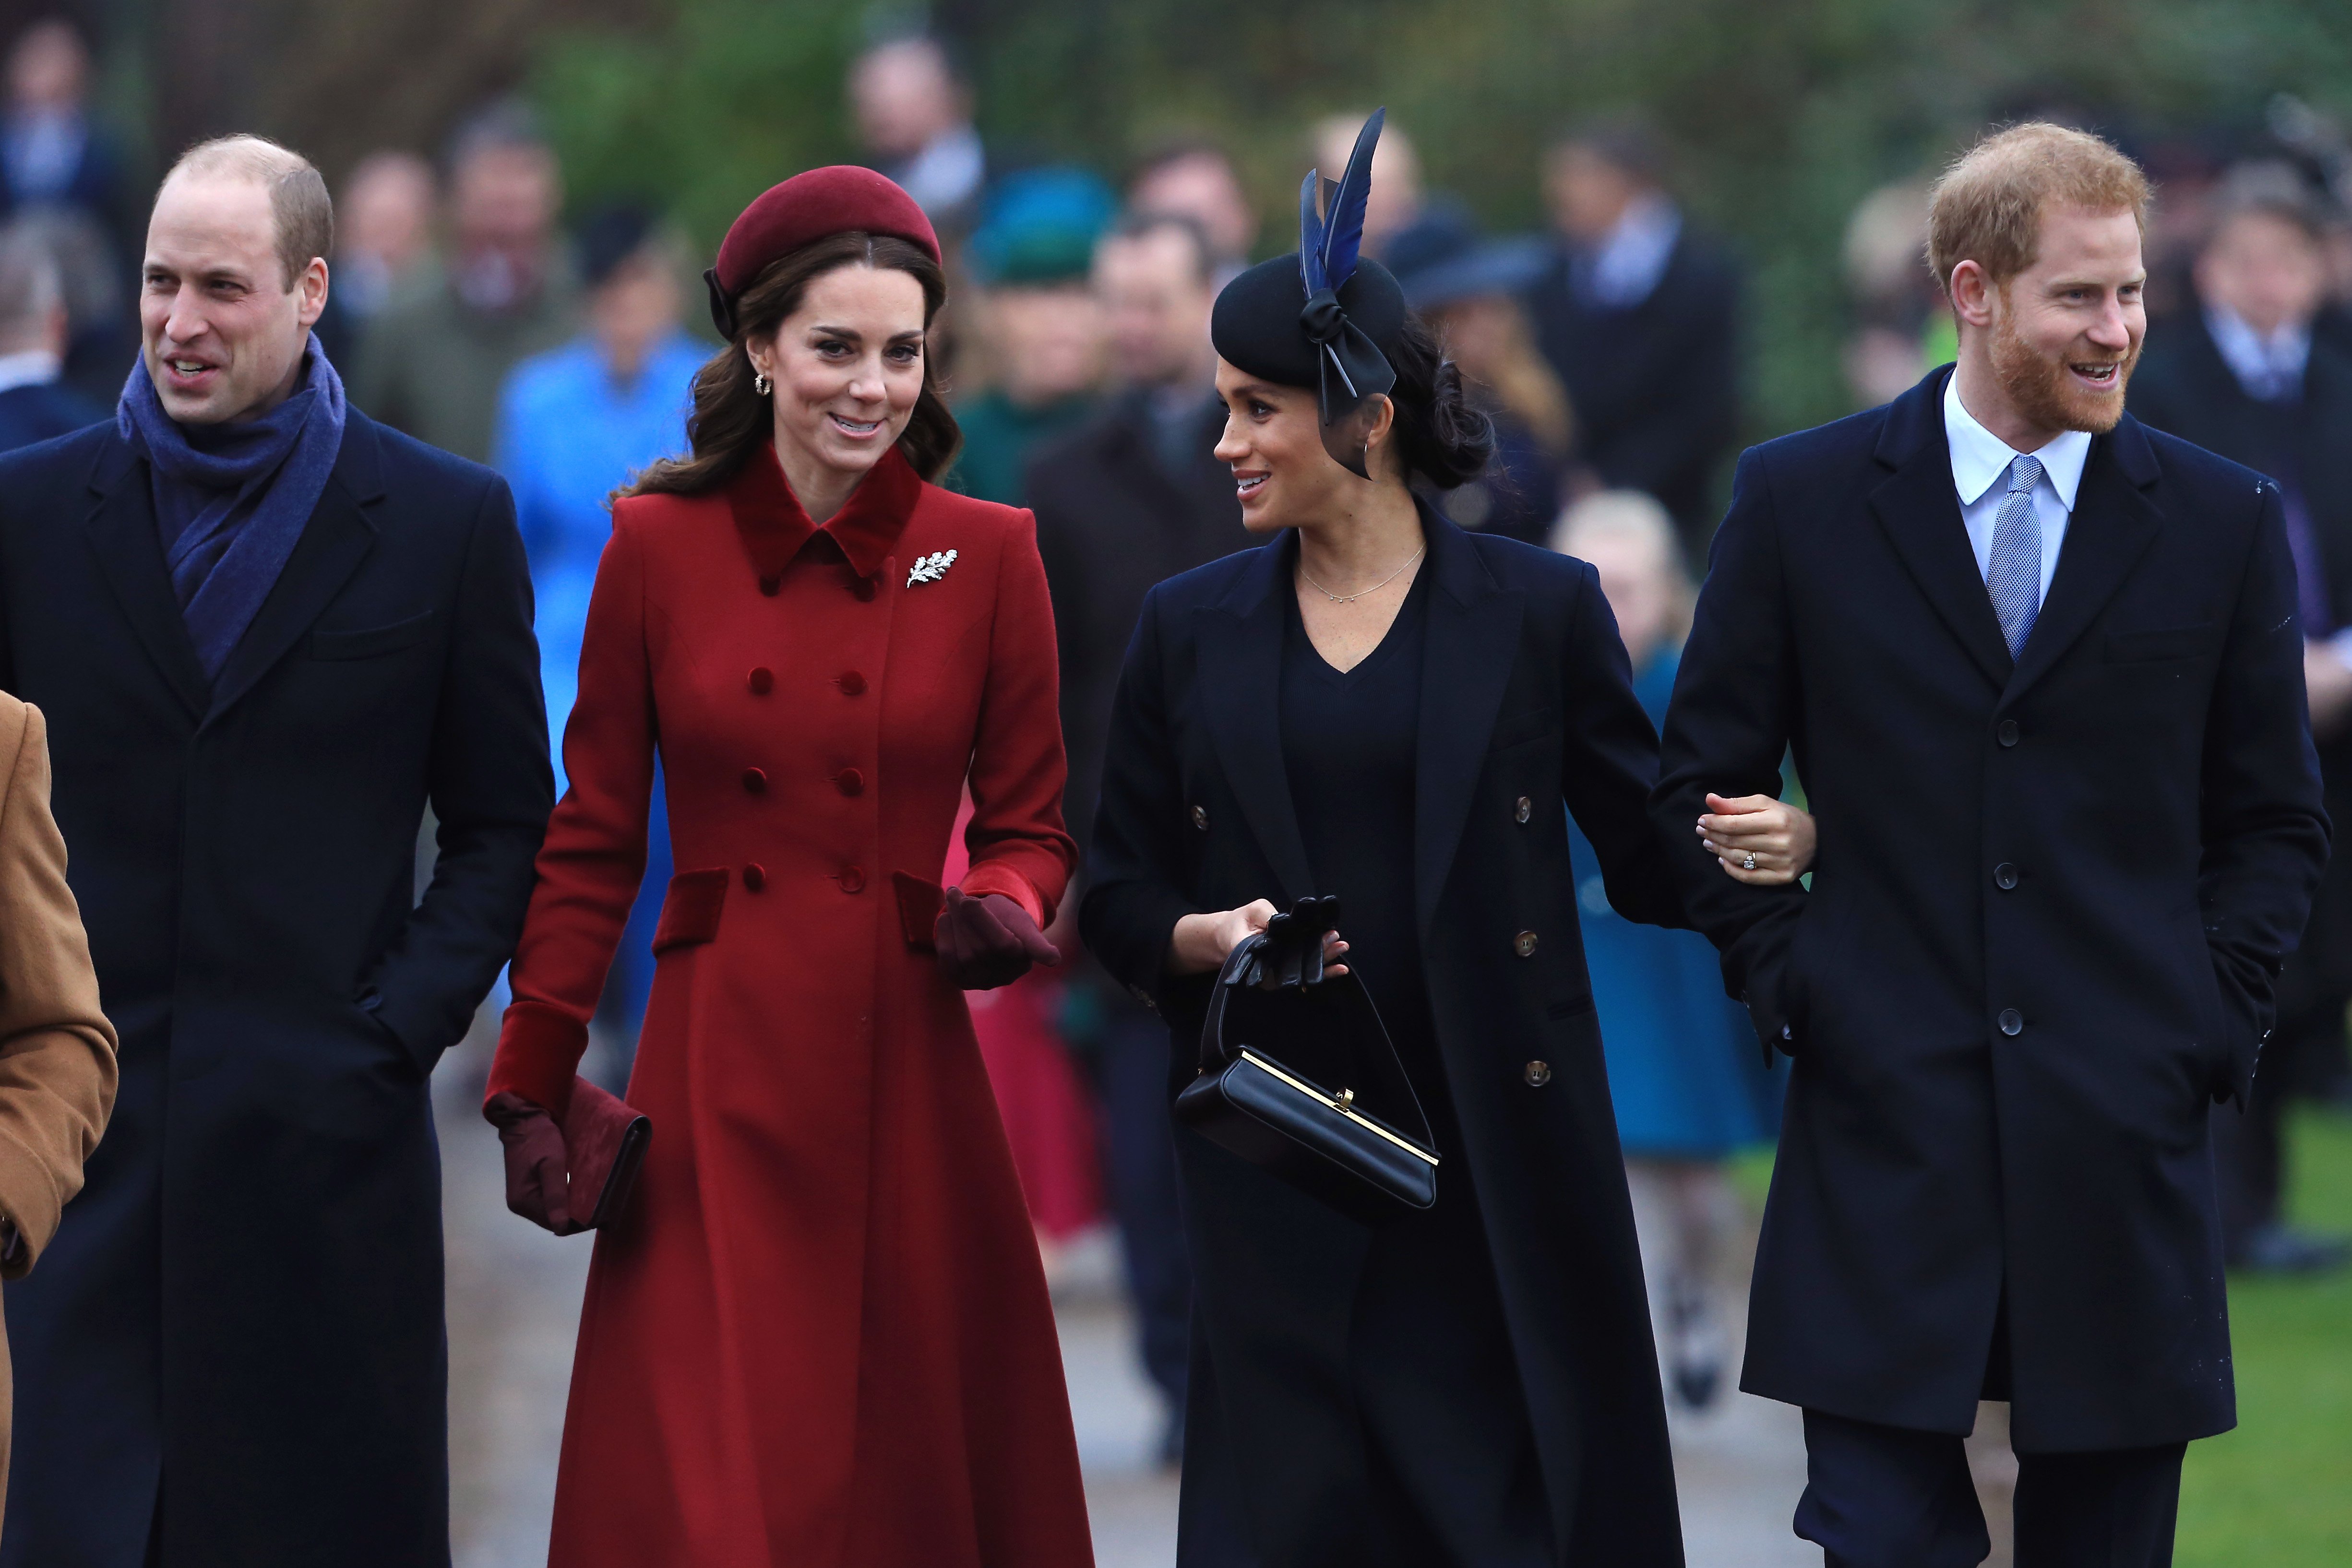 Prince William, Duke of Cambridge, Catherine, Duchess of Cambridge, Meghan, Duchess of Sussex and Prince Harry, Duke of Sussex pictured arriving to attend Christmas Day Church service at Church of St Mary Magdalene on the Sandringham estate on December 25, 2018 in King's Lynn, England. / Source: Getty Images